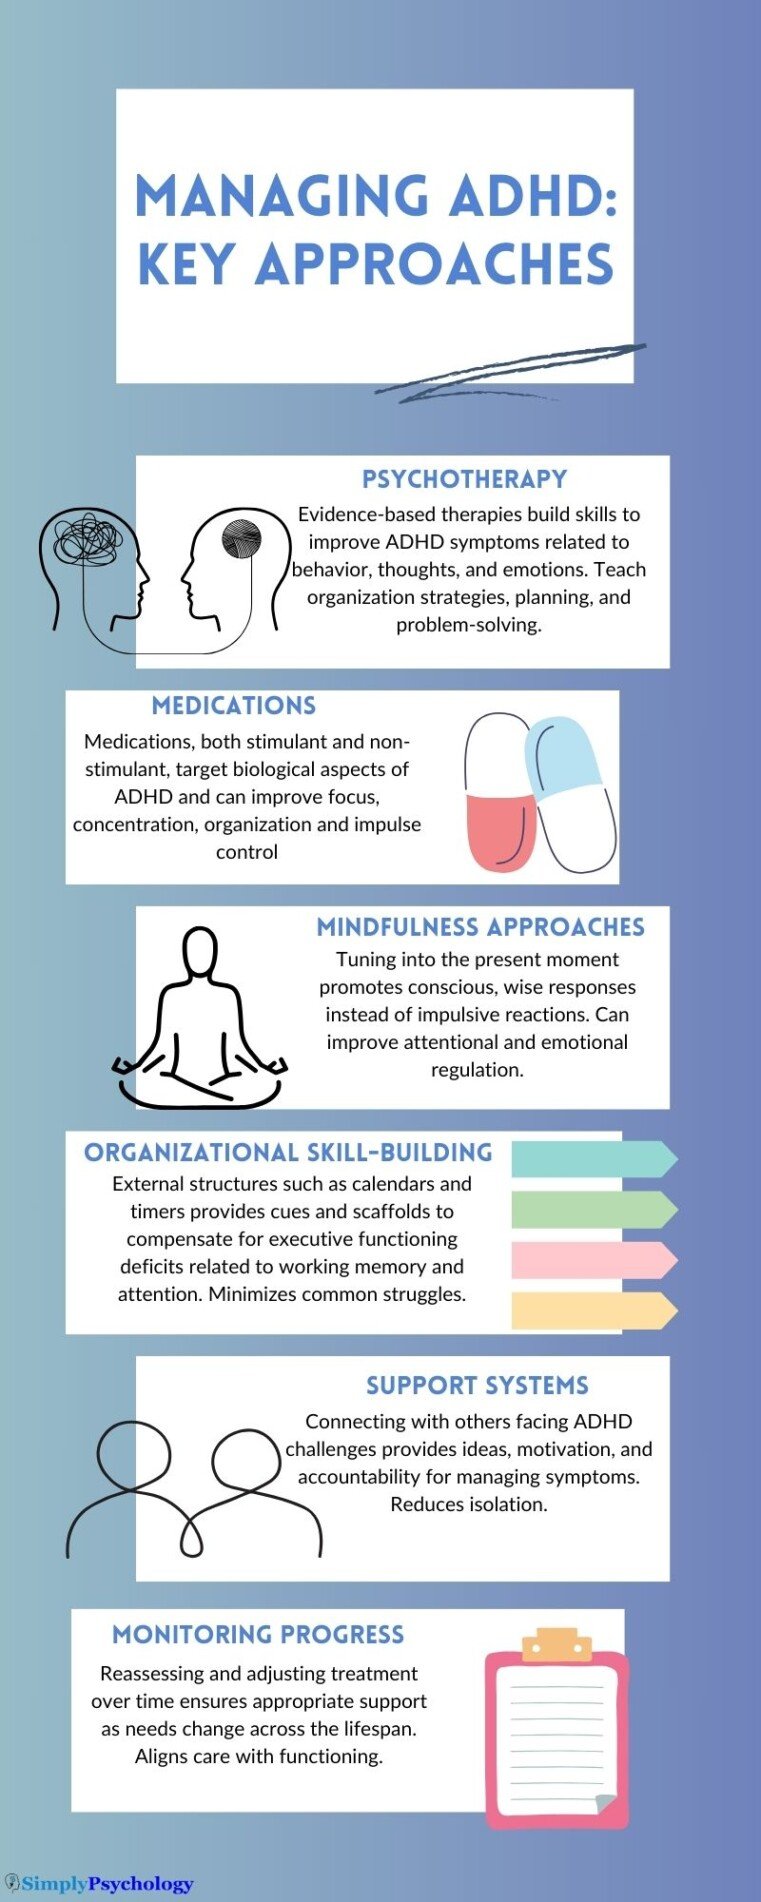 An infographic outlining some of the different treatment and management methods for ADHD including psychotherapy, medications, mindfulness, organizational skill-building, support systems, and monitoring progress.